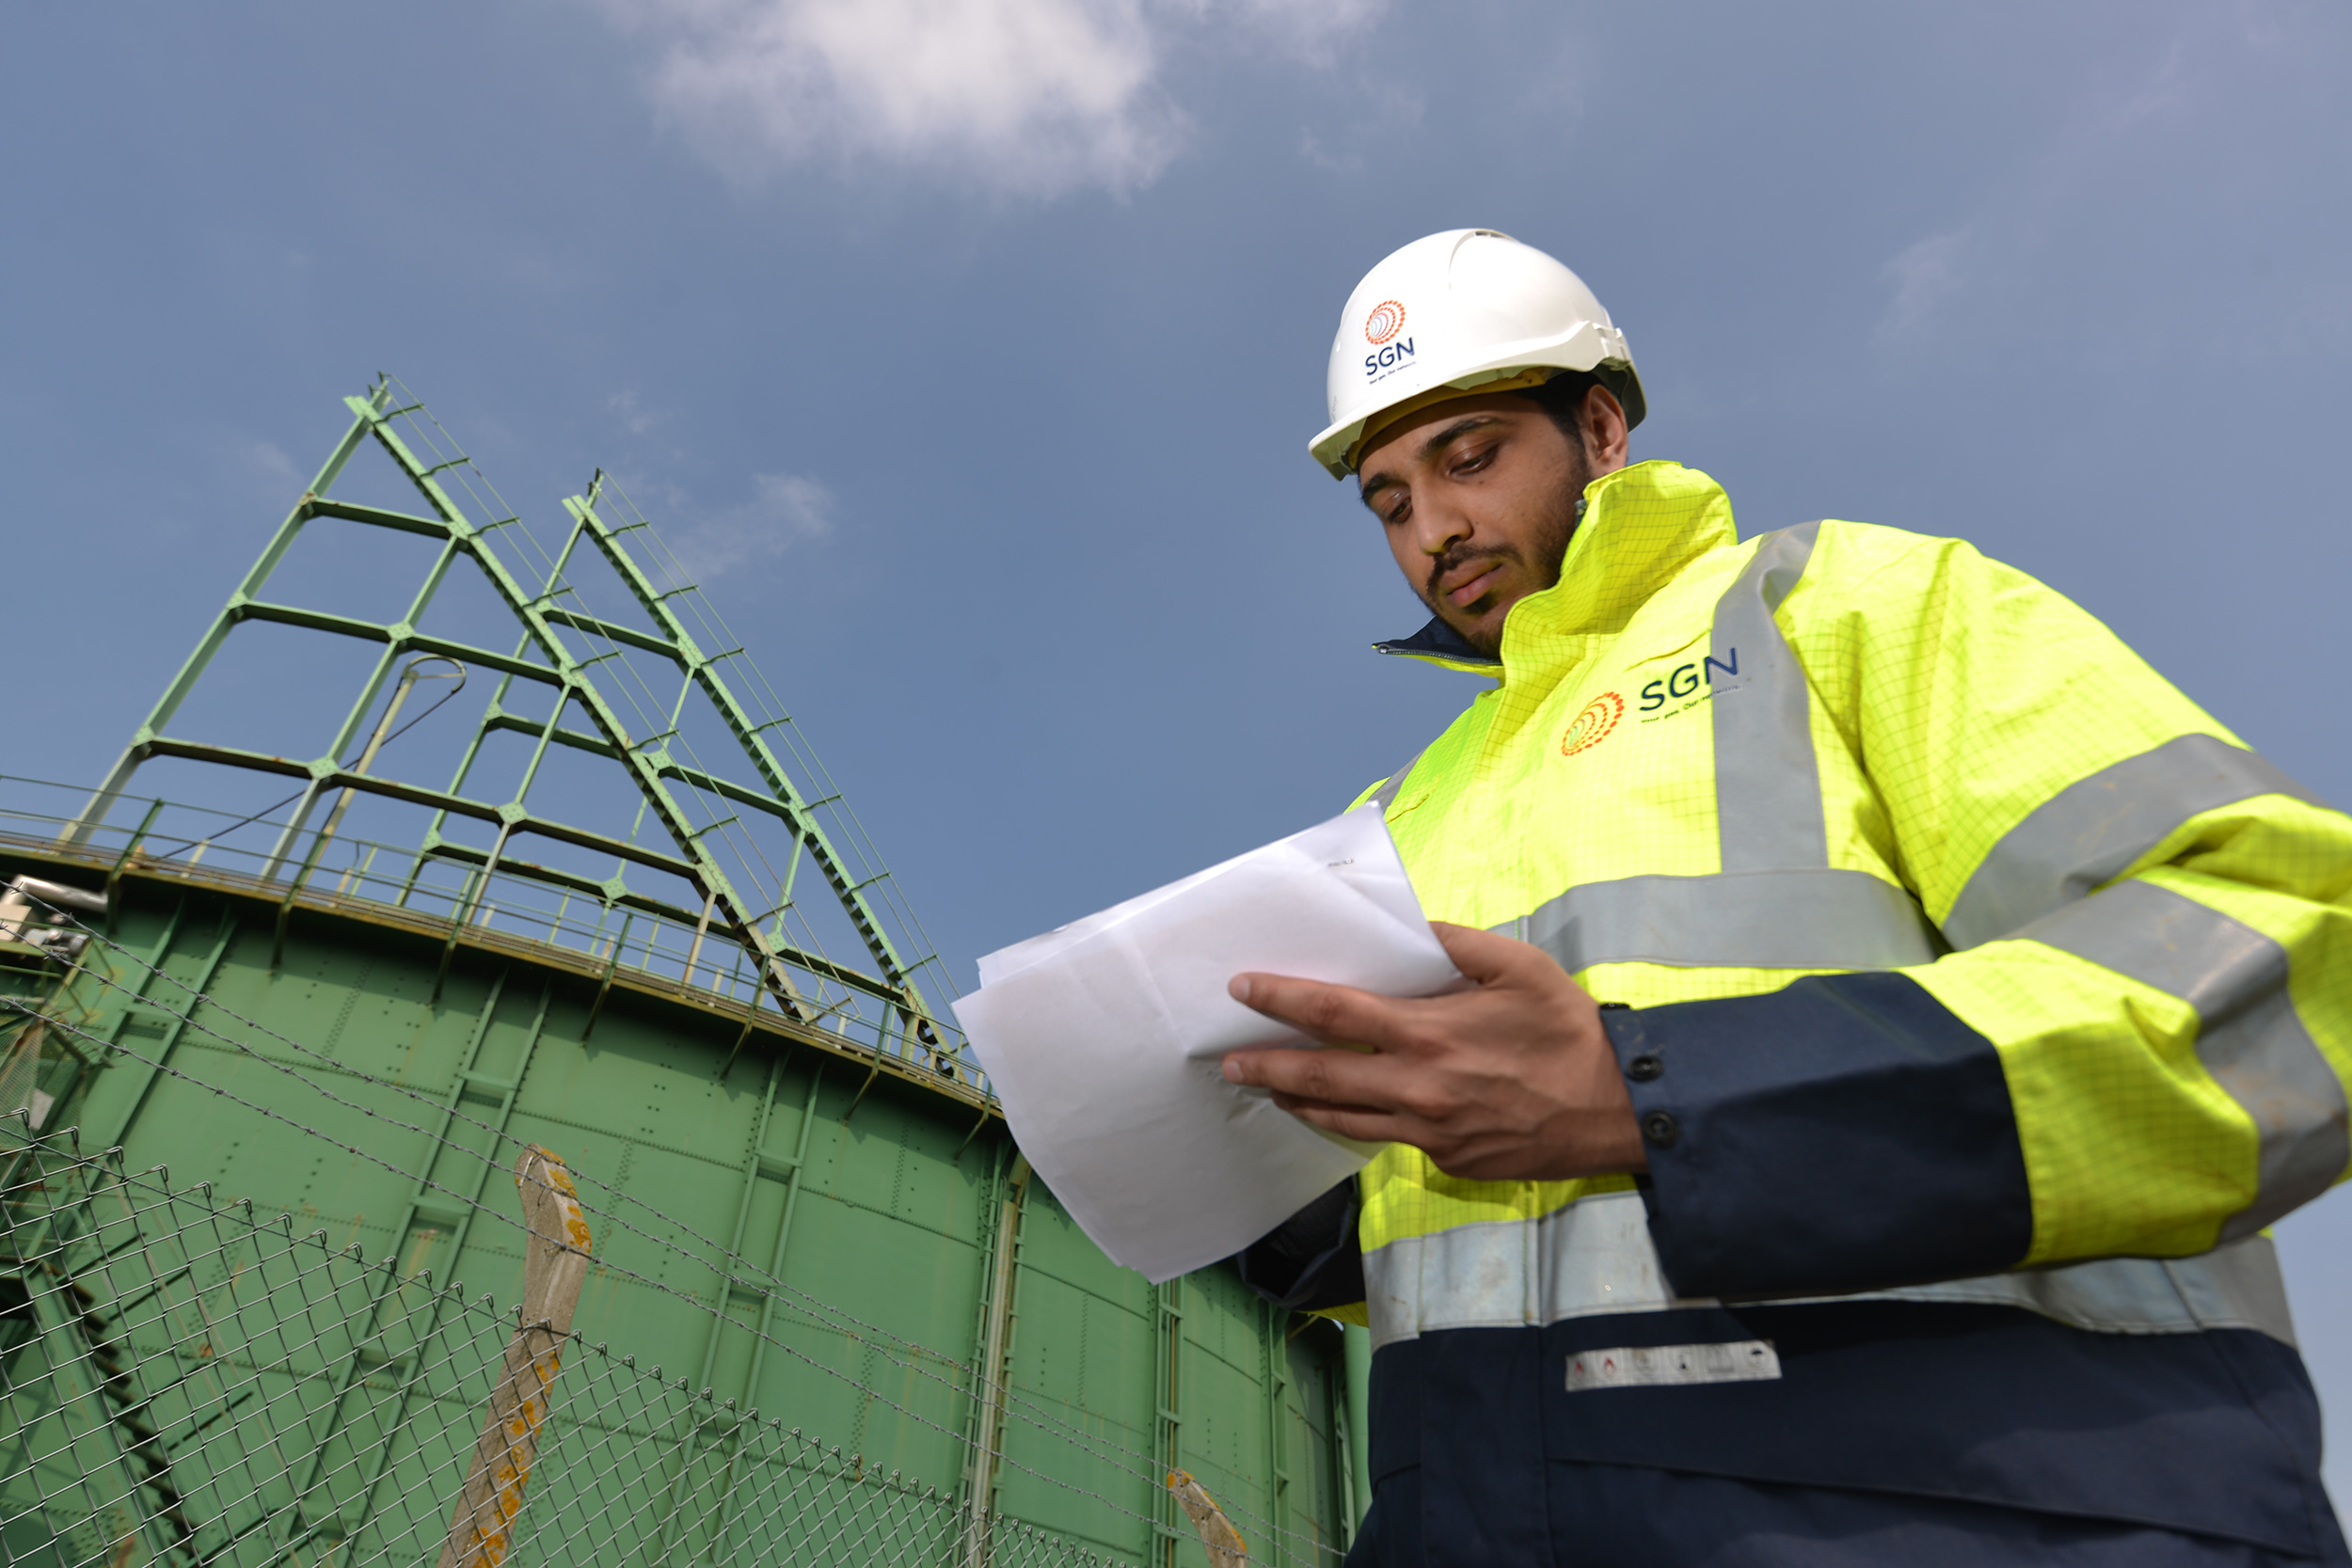 A SGN engineer wearing a high-visibility jacket and hardhat and holding a piece of paper, standing in front of a gas holder